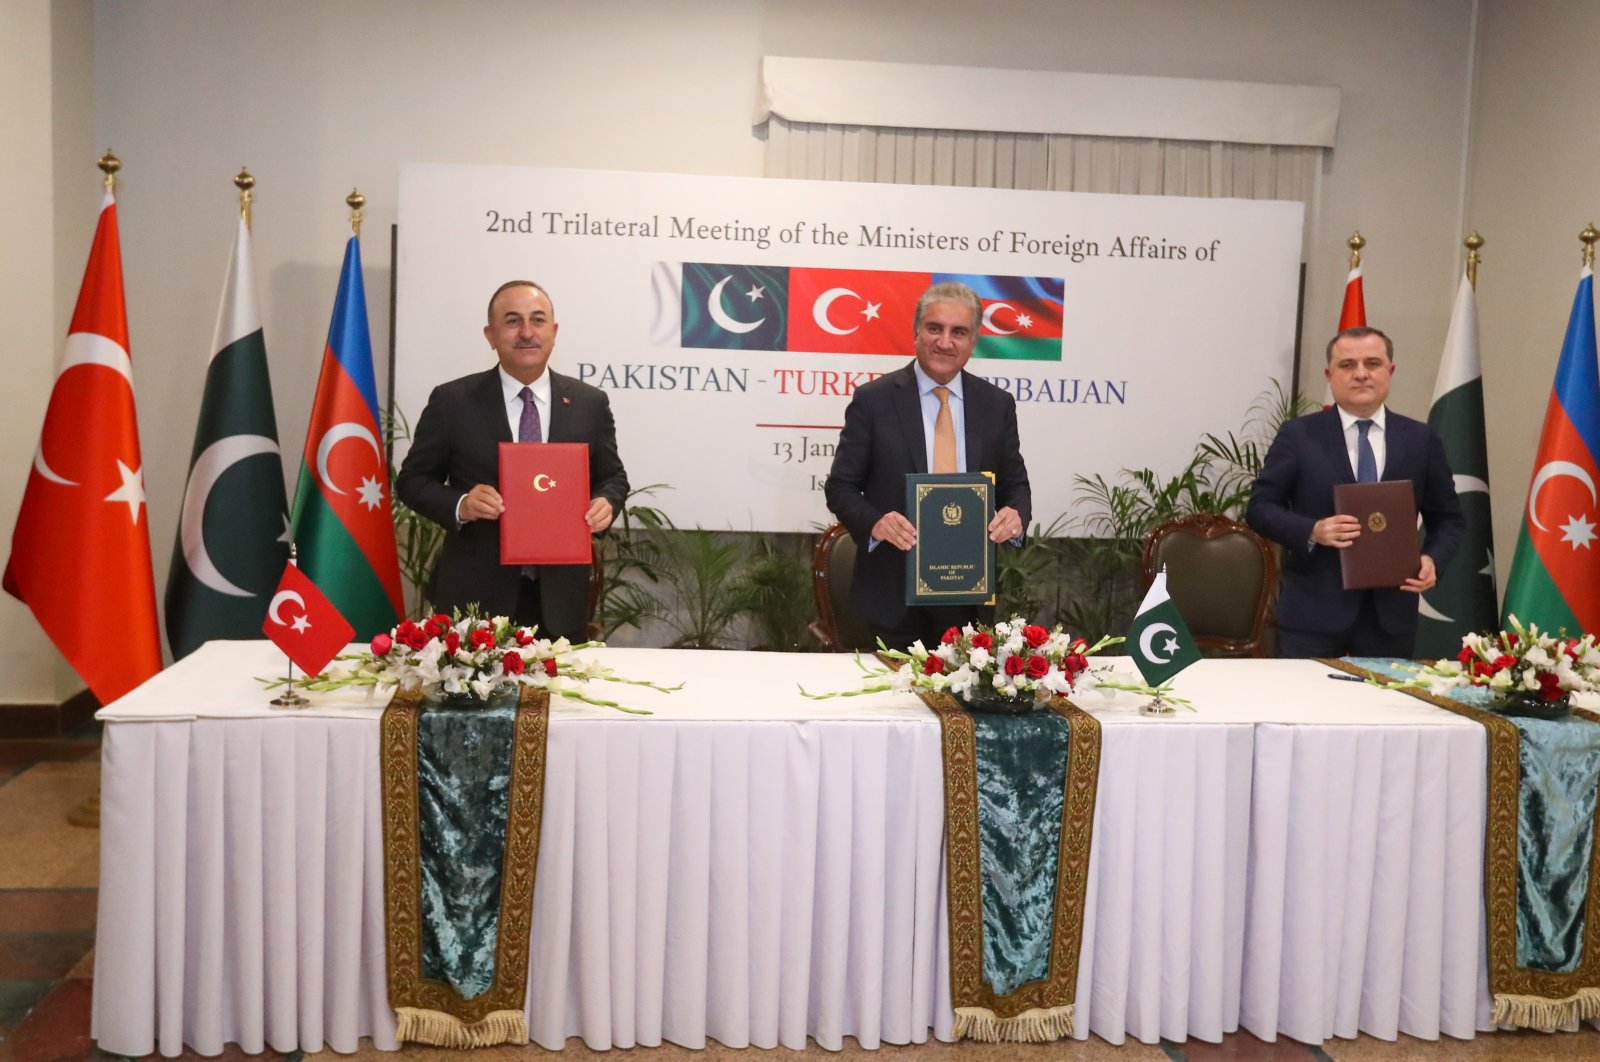 Foreign Minister Mevlüt Çavuşoğlu (L), Pakistani Foreign Minister Shah Mahmood Qureshi (C) and Azerbaijani Foreign Minister Jeyhun Bayramov attend a trilateral meeting in the capital Islamabad, Pakistan, Jan. 13, 2020. (AA Photo)